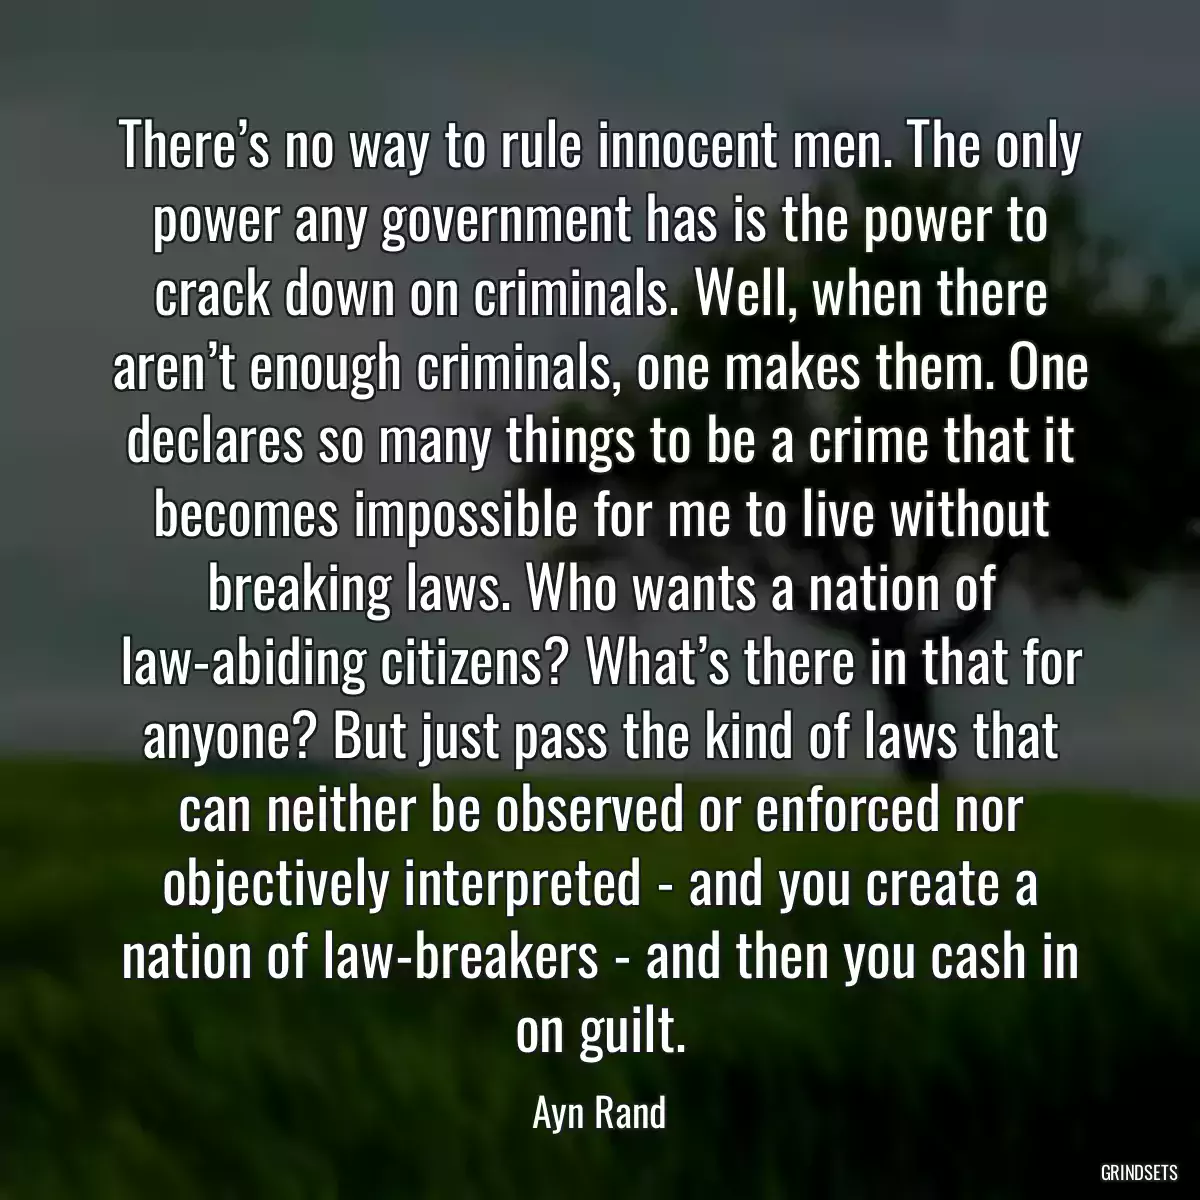 There’s no way to rule innocent men. The only power any government has is the power to crack down on criminals. Well, when there aren’t enough criminals, one makes them. One declares so many things to be a crime that it becomes impossible for me to live without breaking laws. Who wants a nation of law-abiding citizens? What’s there in that for anyone? But just pass the kind of laws that can neither be observed or enforced nor objectively interpreted - and you create a nation of law-breakers - and then you cash in on guilt.